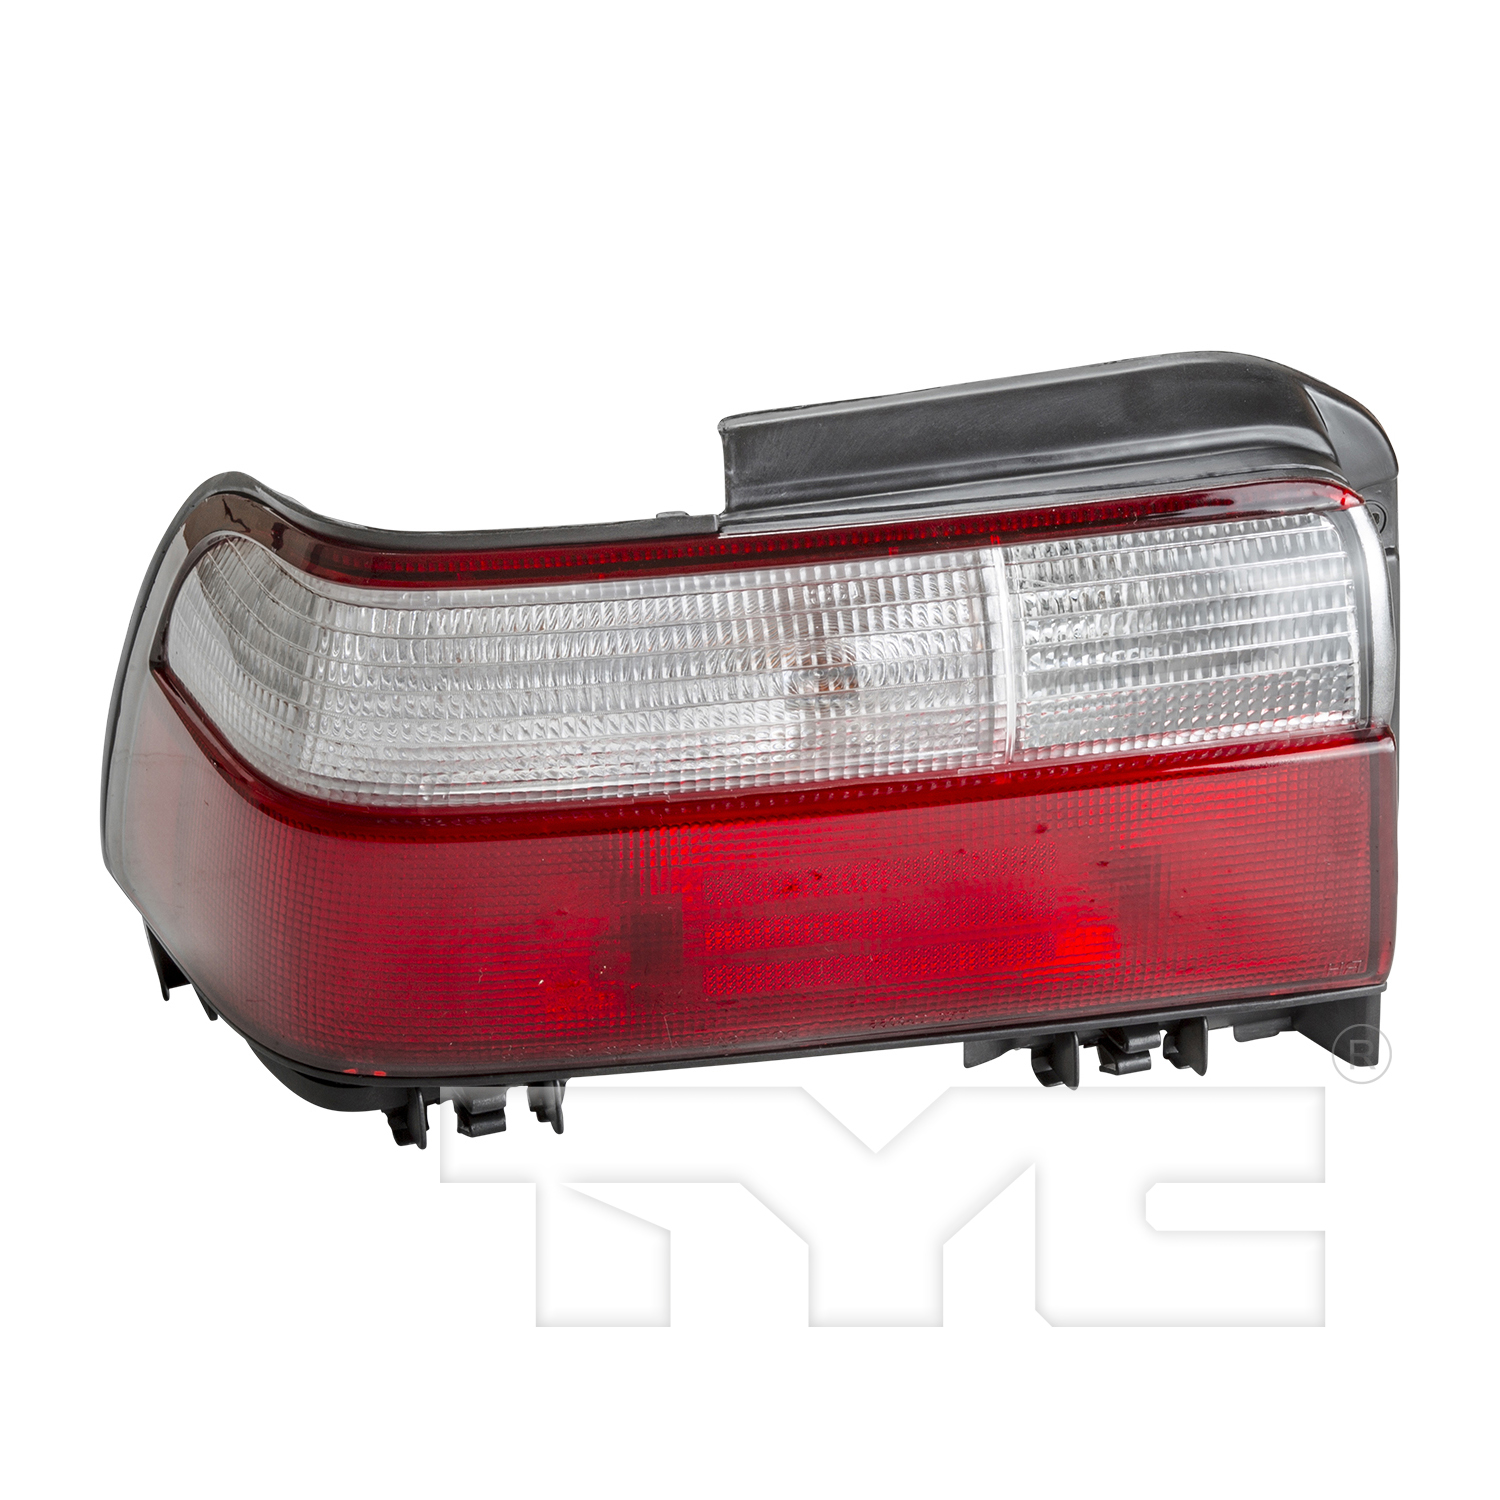 Aftermarket TAILLIGHTS for TOYOTA - COROLLA, COROLLA,96-97,LT Taillamp assy